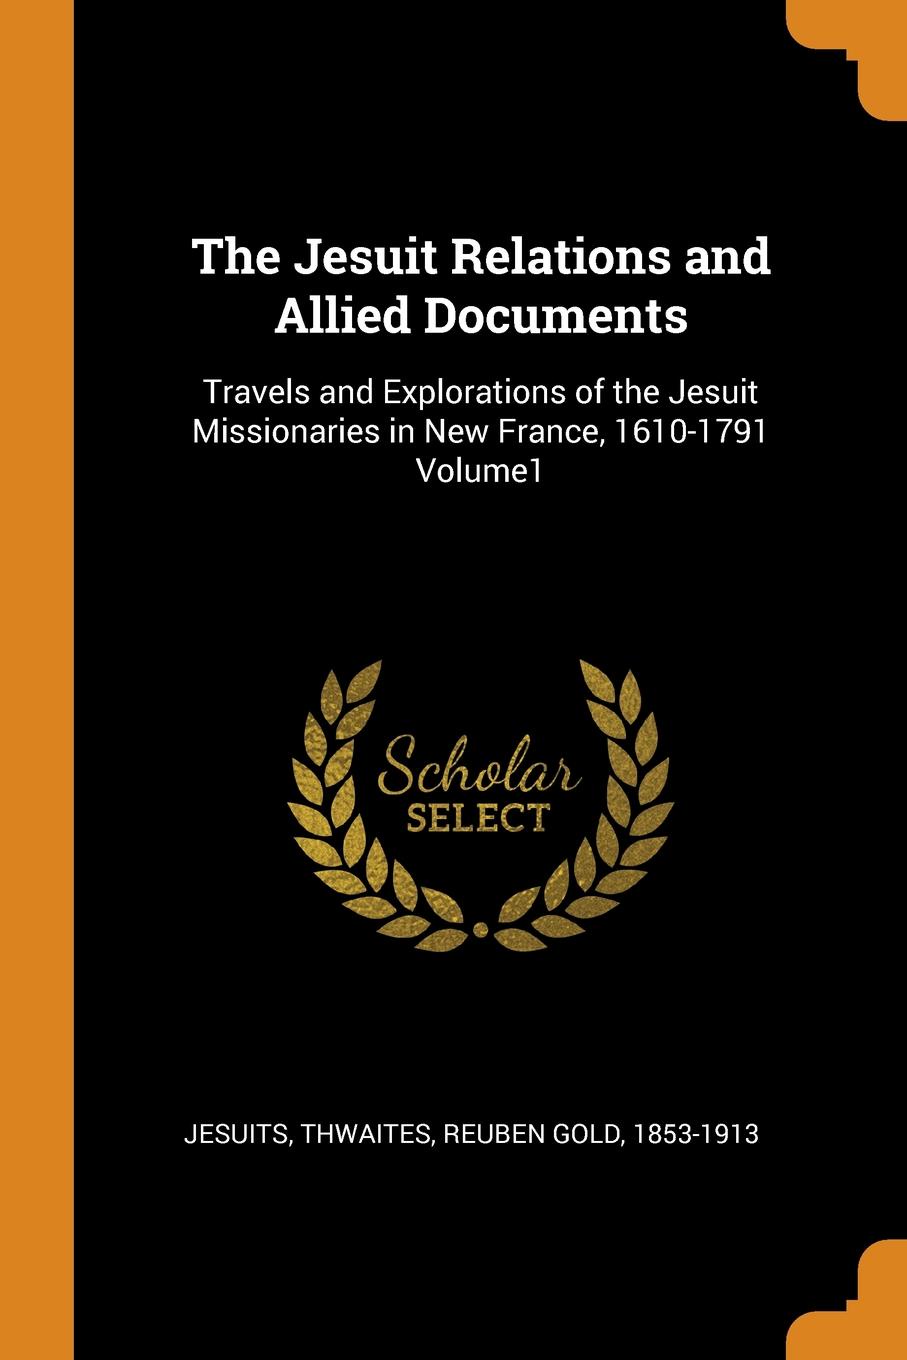 The Jesuit Relations and Allied Documents. Travels and Explorations of the Jesuit Missionaries in New France, 1610-1791 Volume1